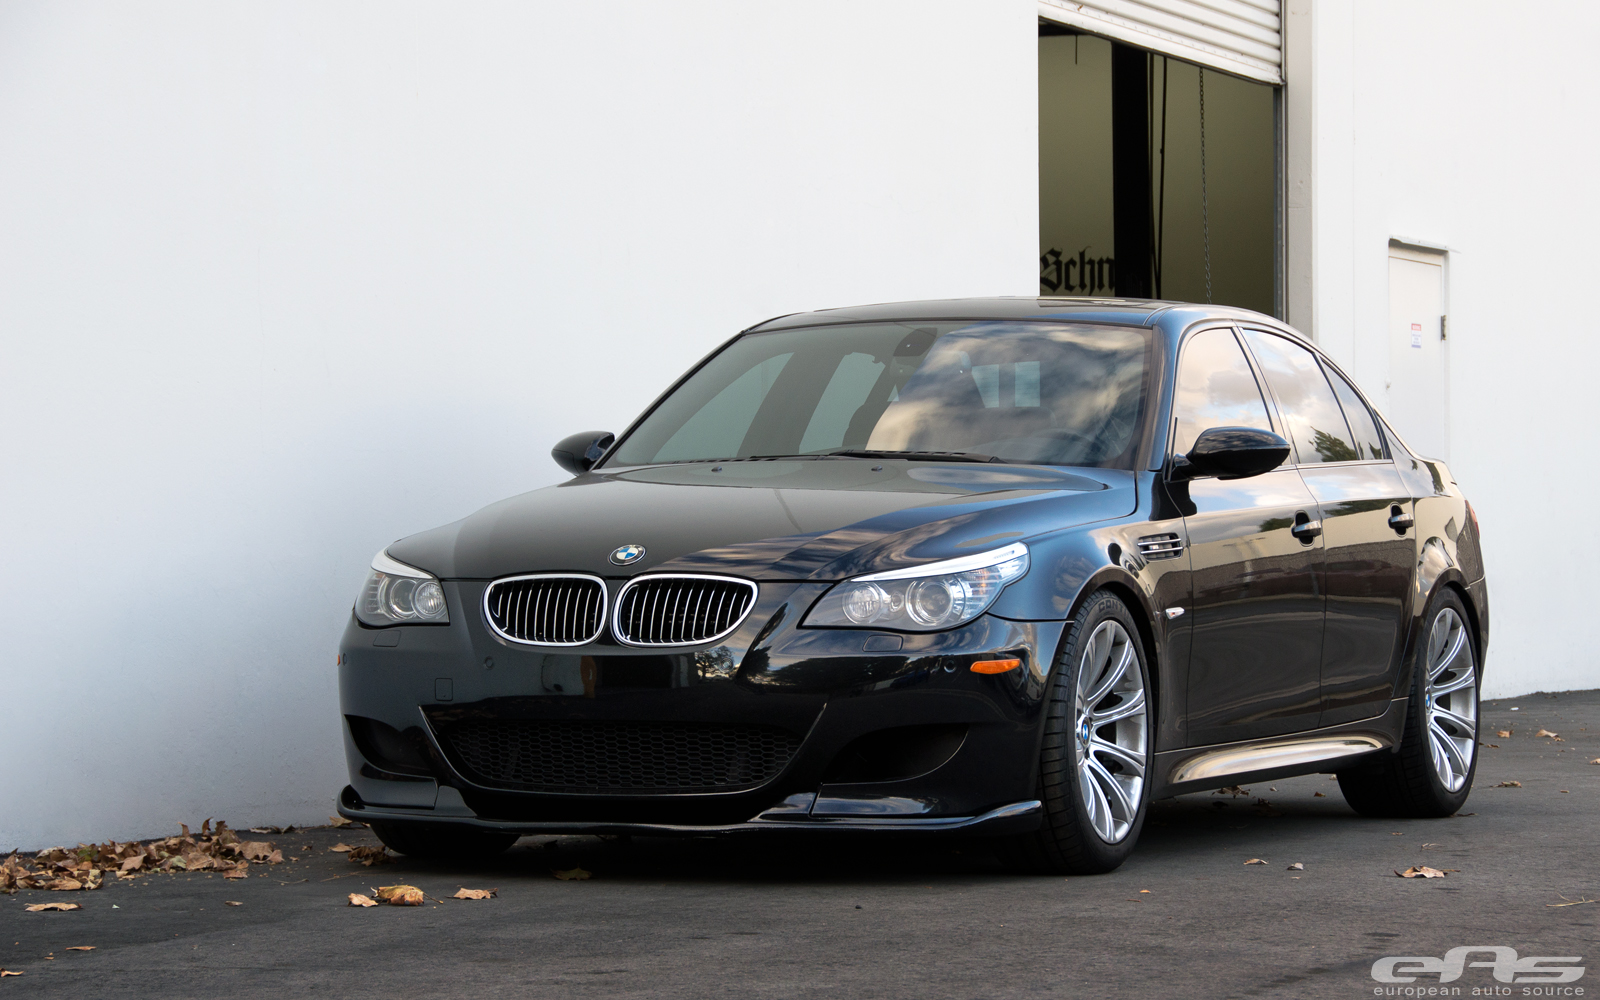 bmw-e60-m5-gets-new-stance-at-eas_1.jpg